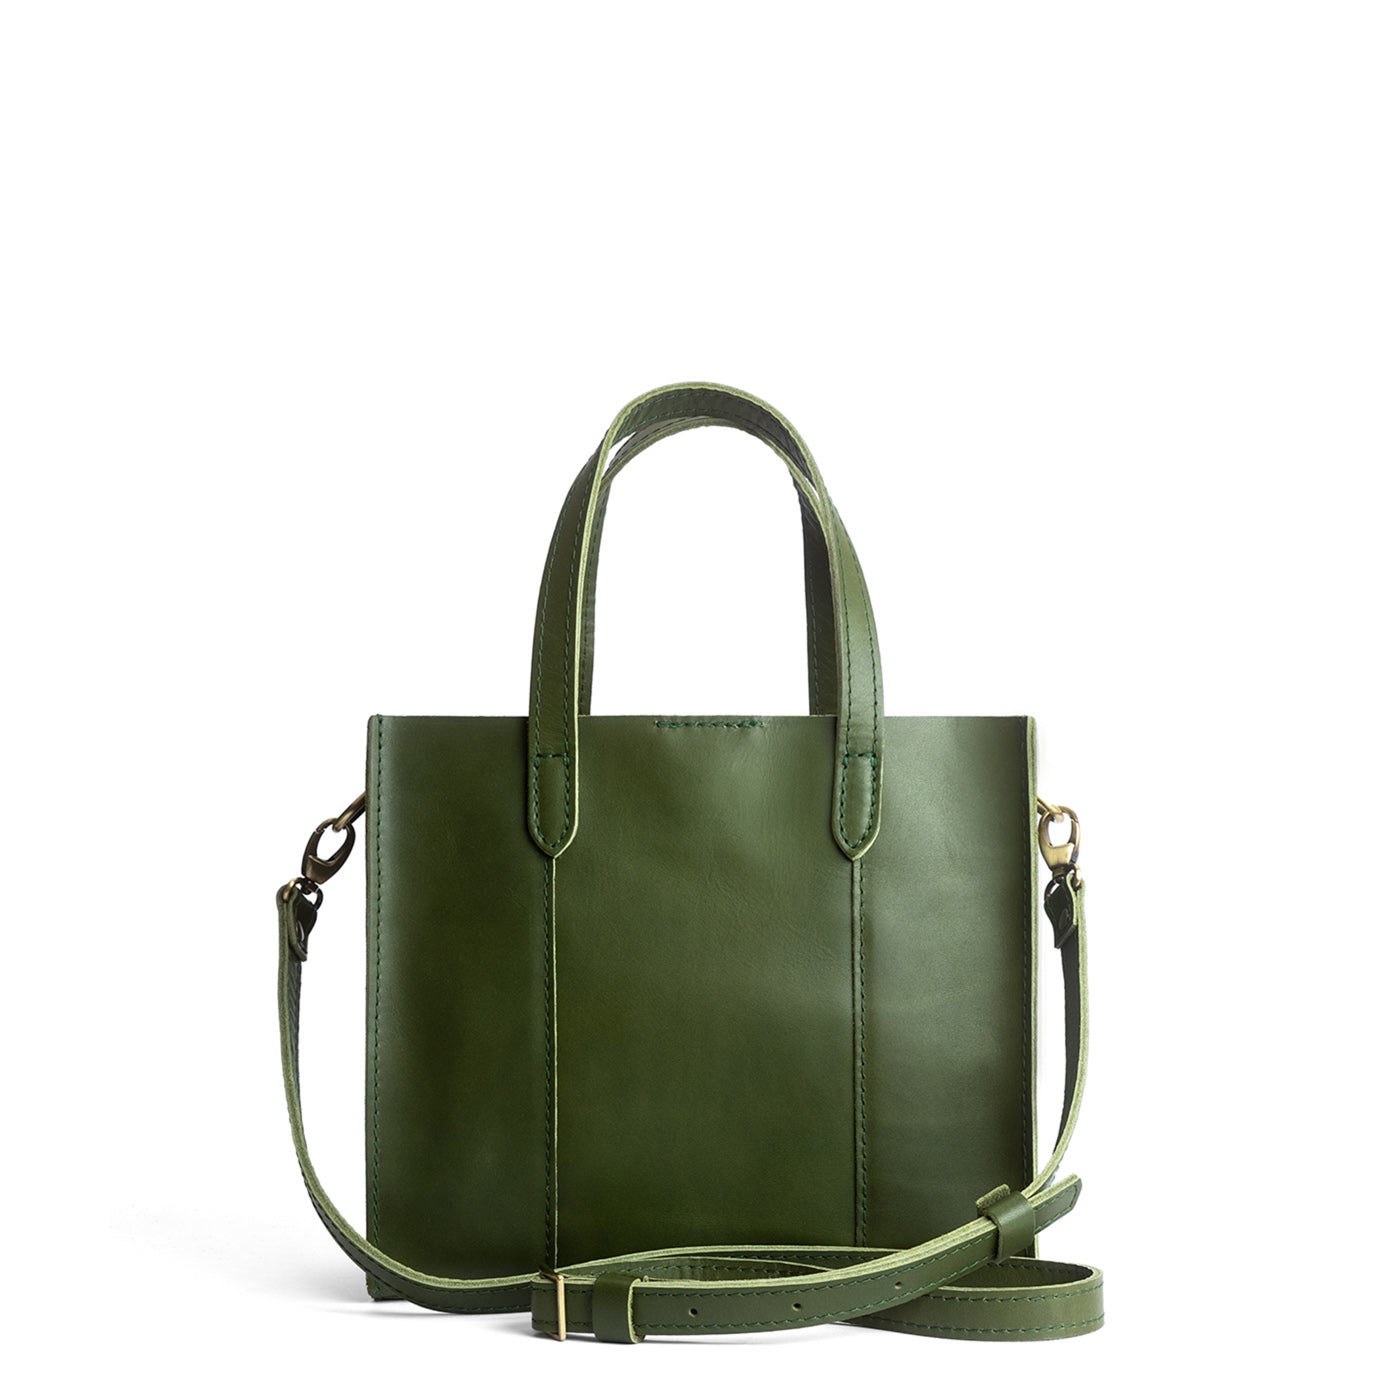 Pine | Structured mid-size tote bag with overlapping panels and crossbody strap